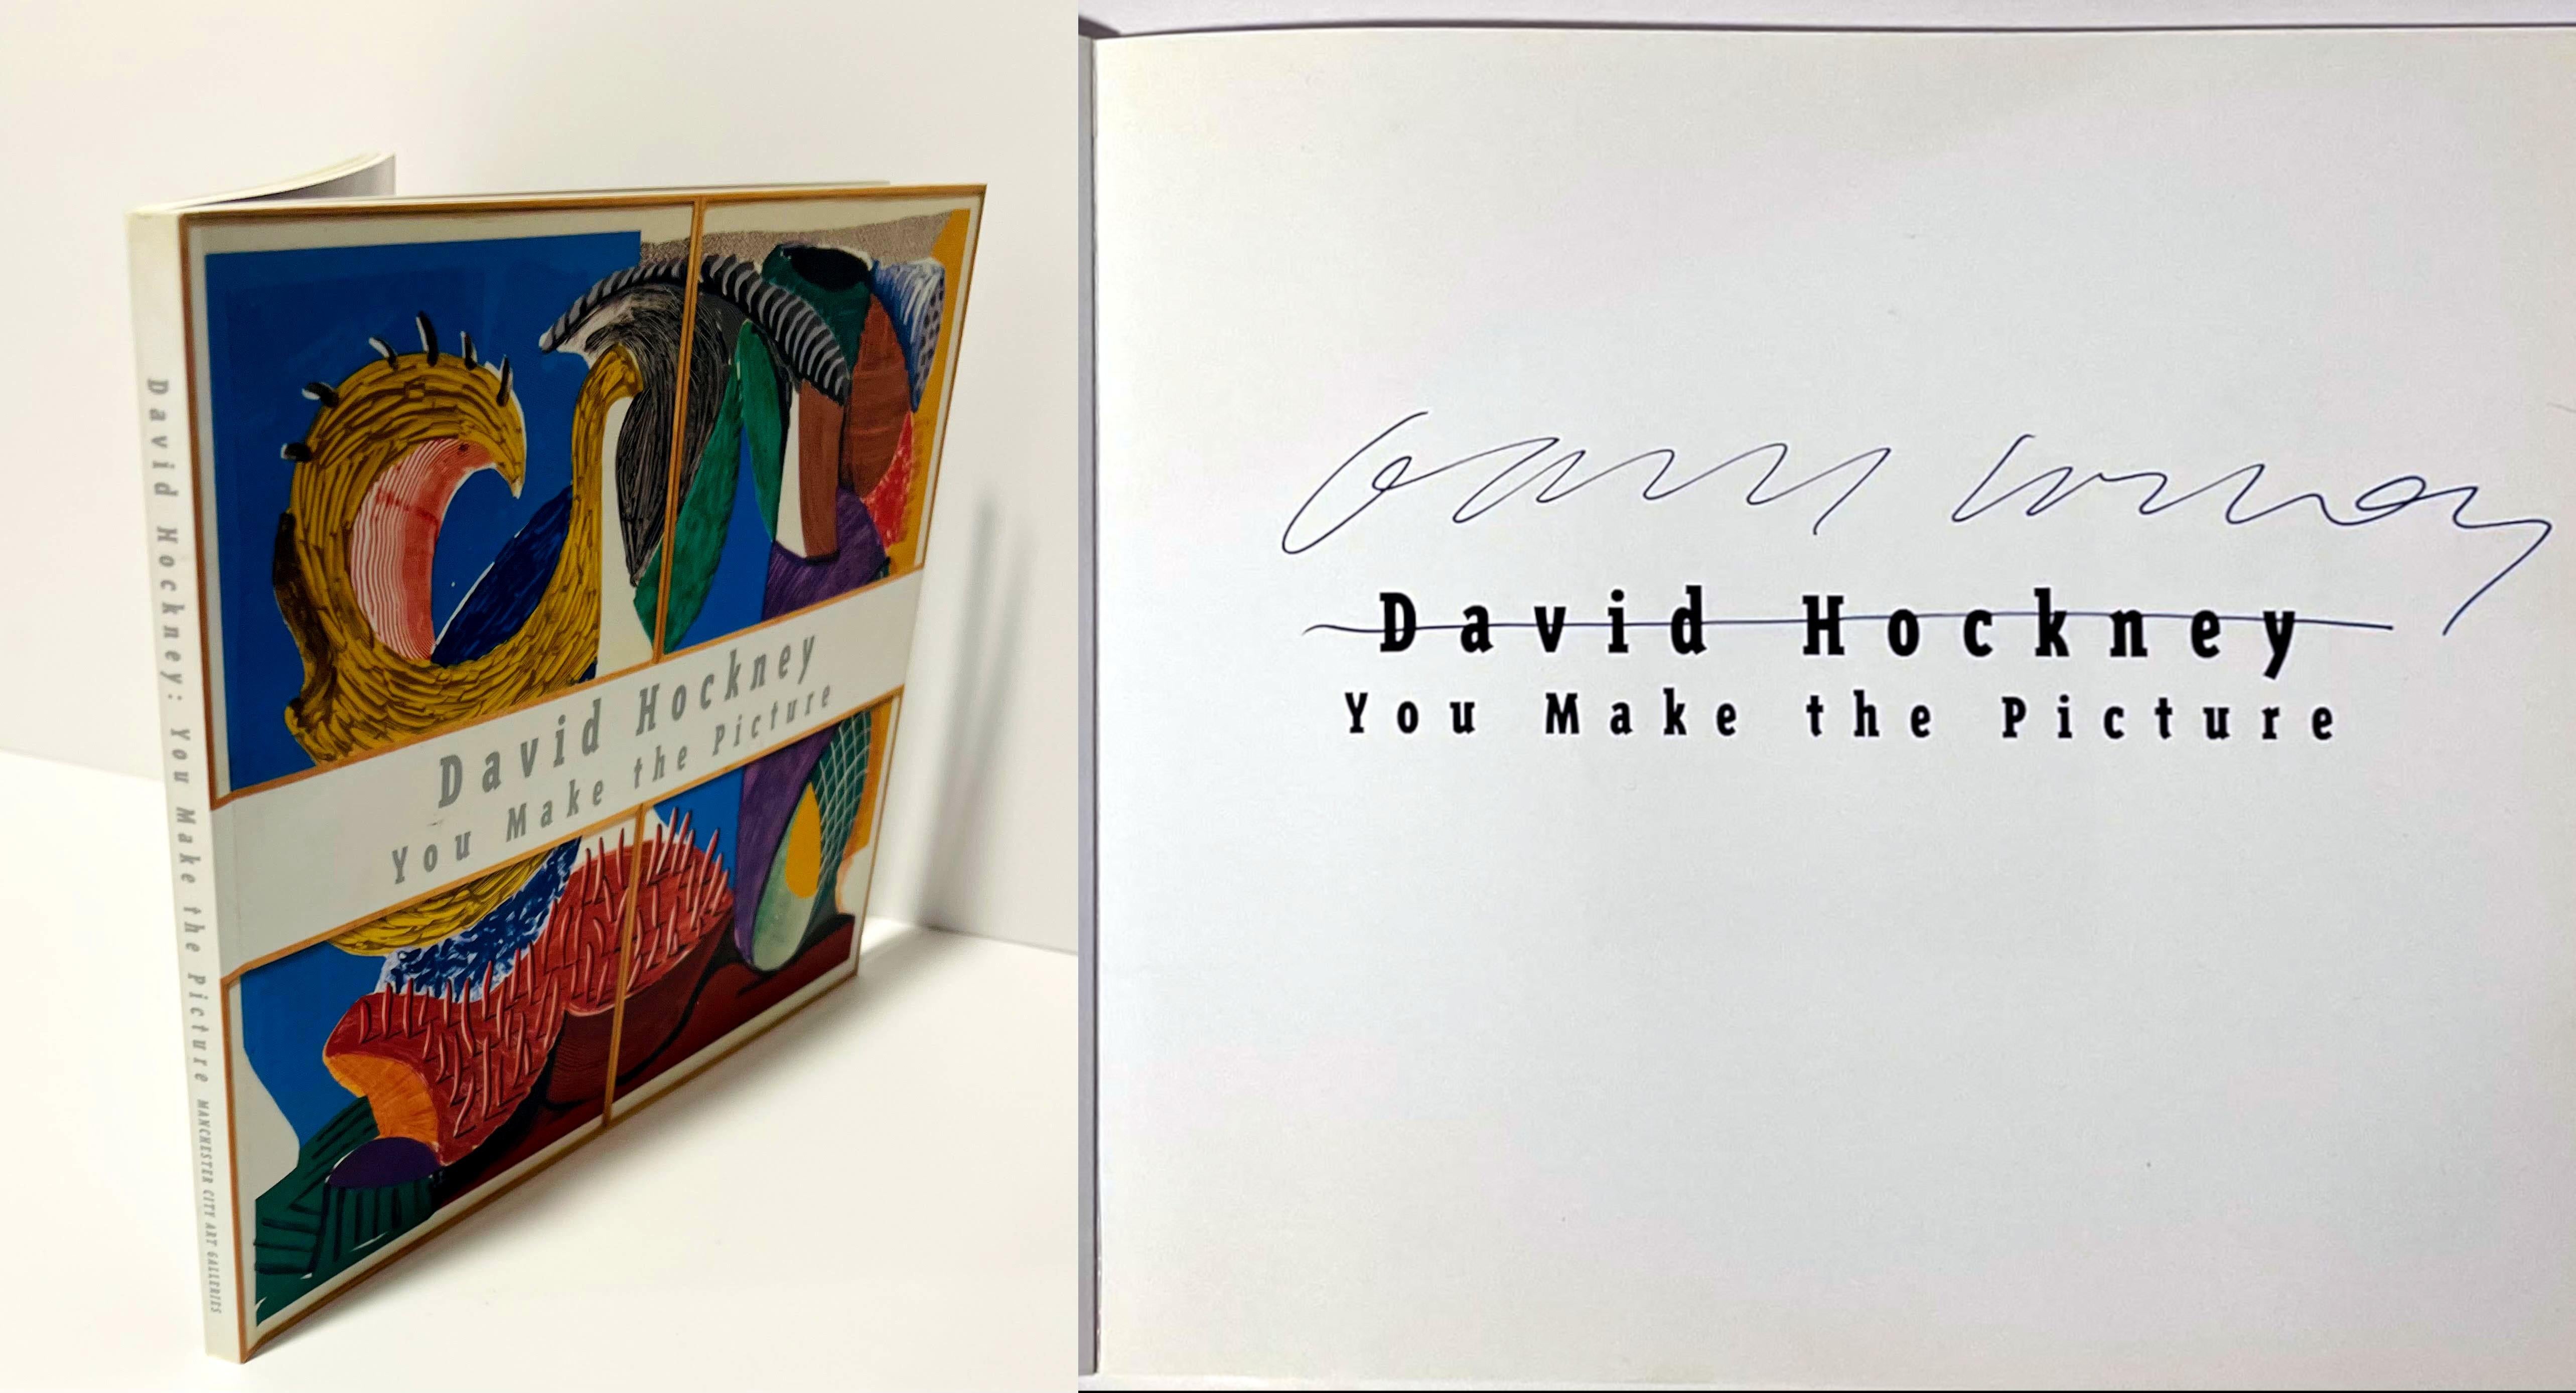 David Hockney
You Make the Picture (hand signed by David Hockney), 1996
Softback catalogue with stiff wraps and French folded flaps (hand signed by David Hockney)
hand signed by David Hockney on the half title page
9 × 8 × 1/2 inches
Published on